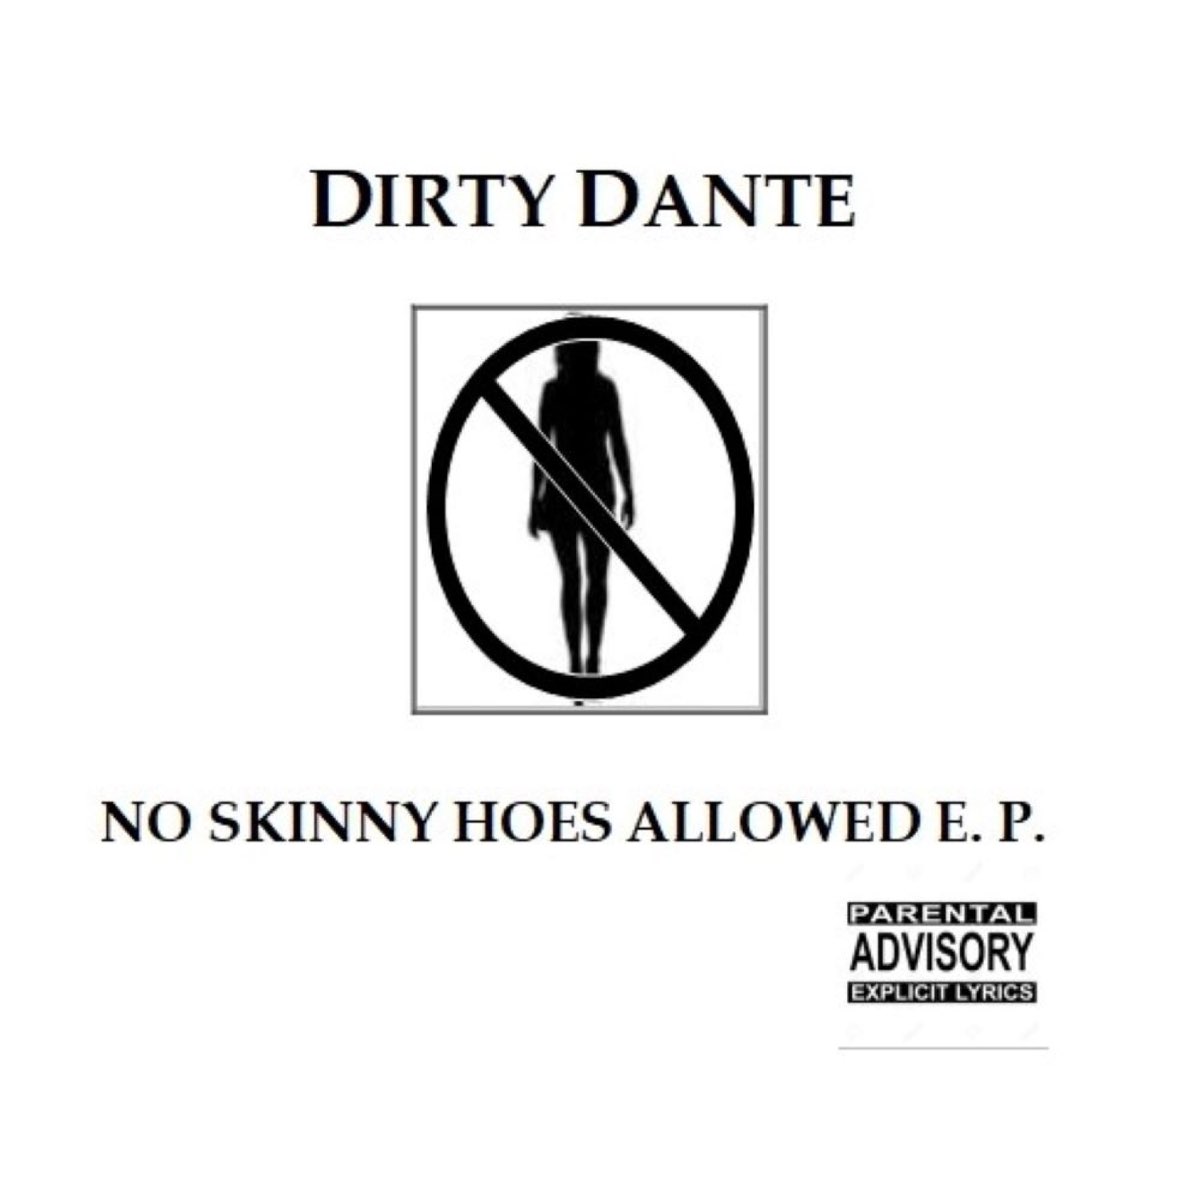 No Skinny Hoes Allowed E. P. - EP - Album by Dirty Dante - Apple Music